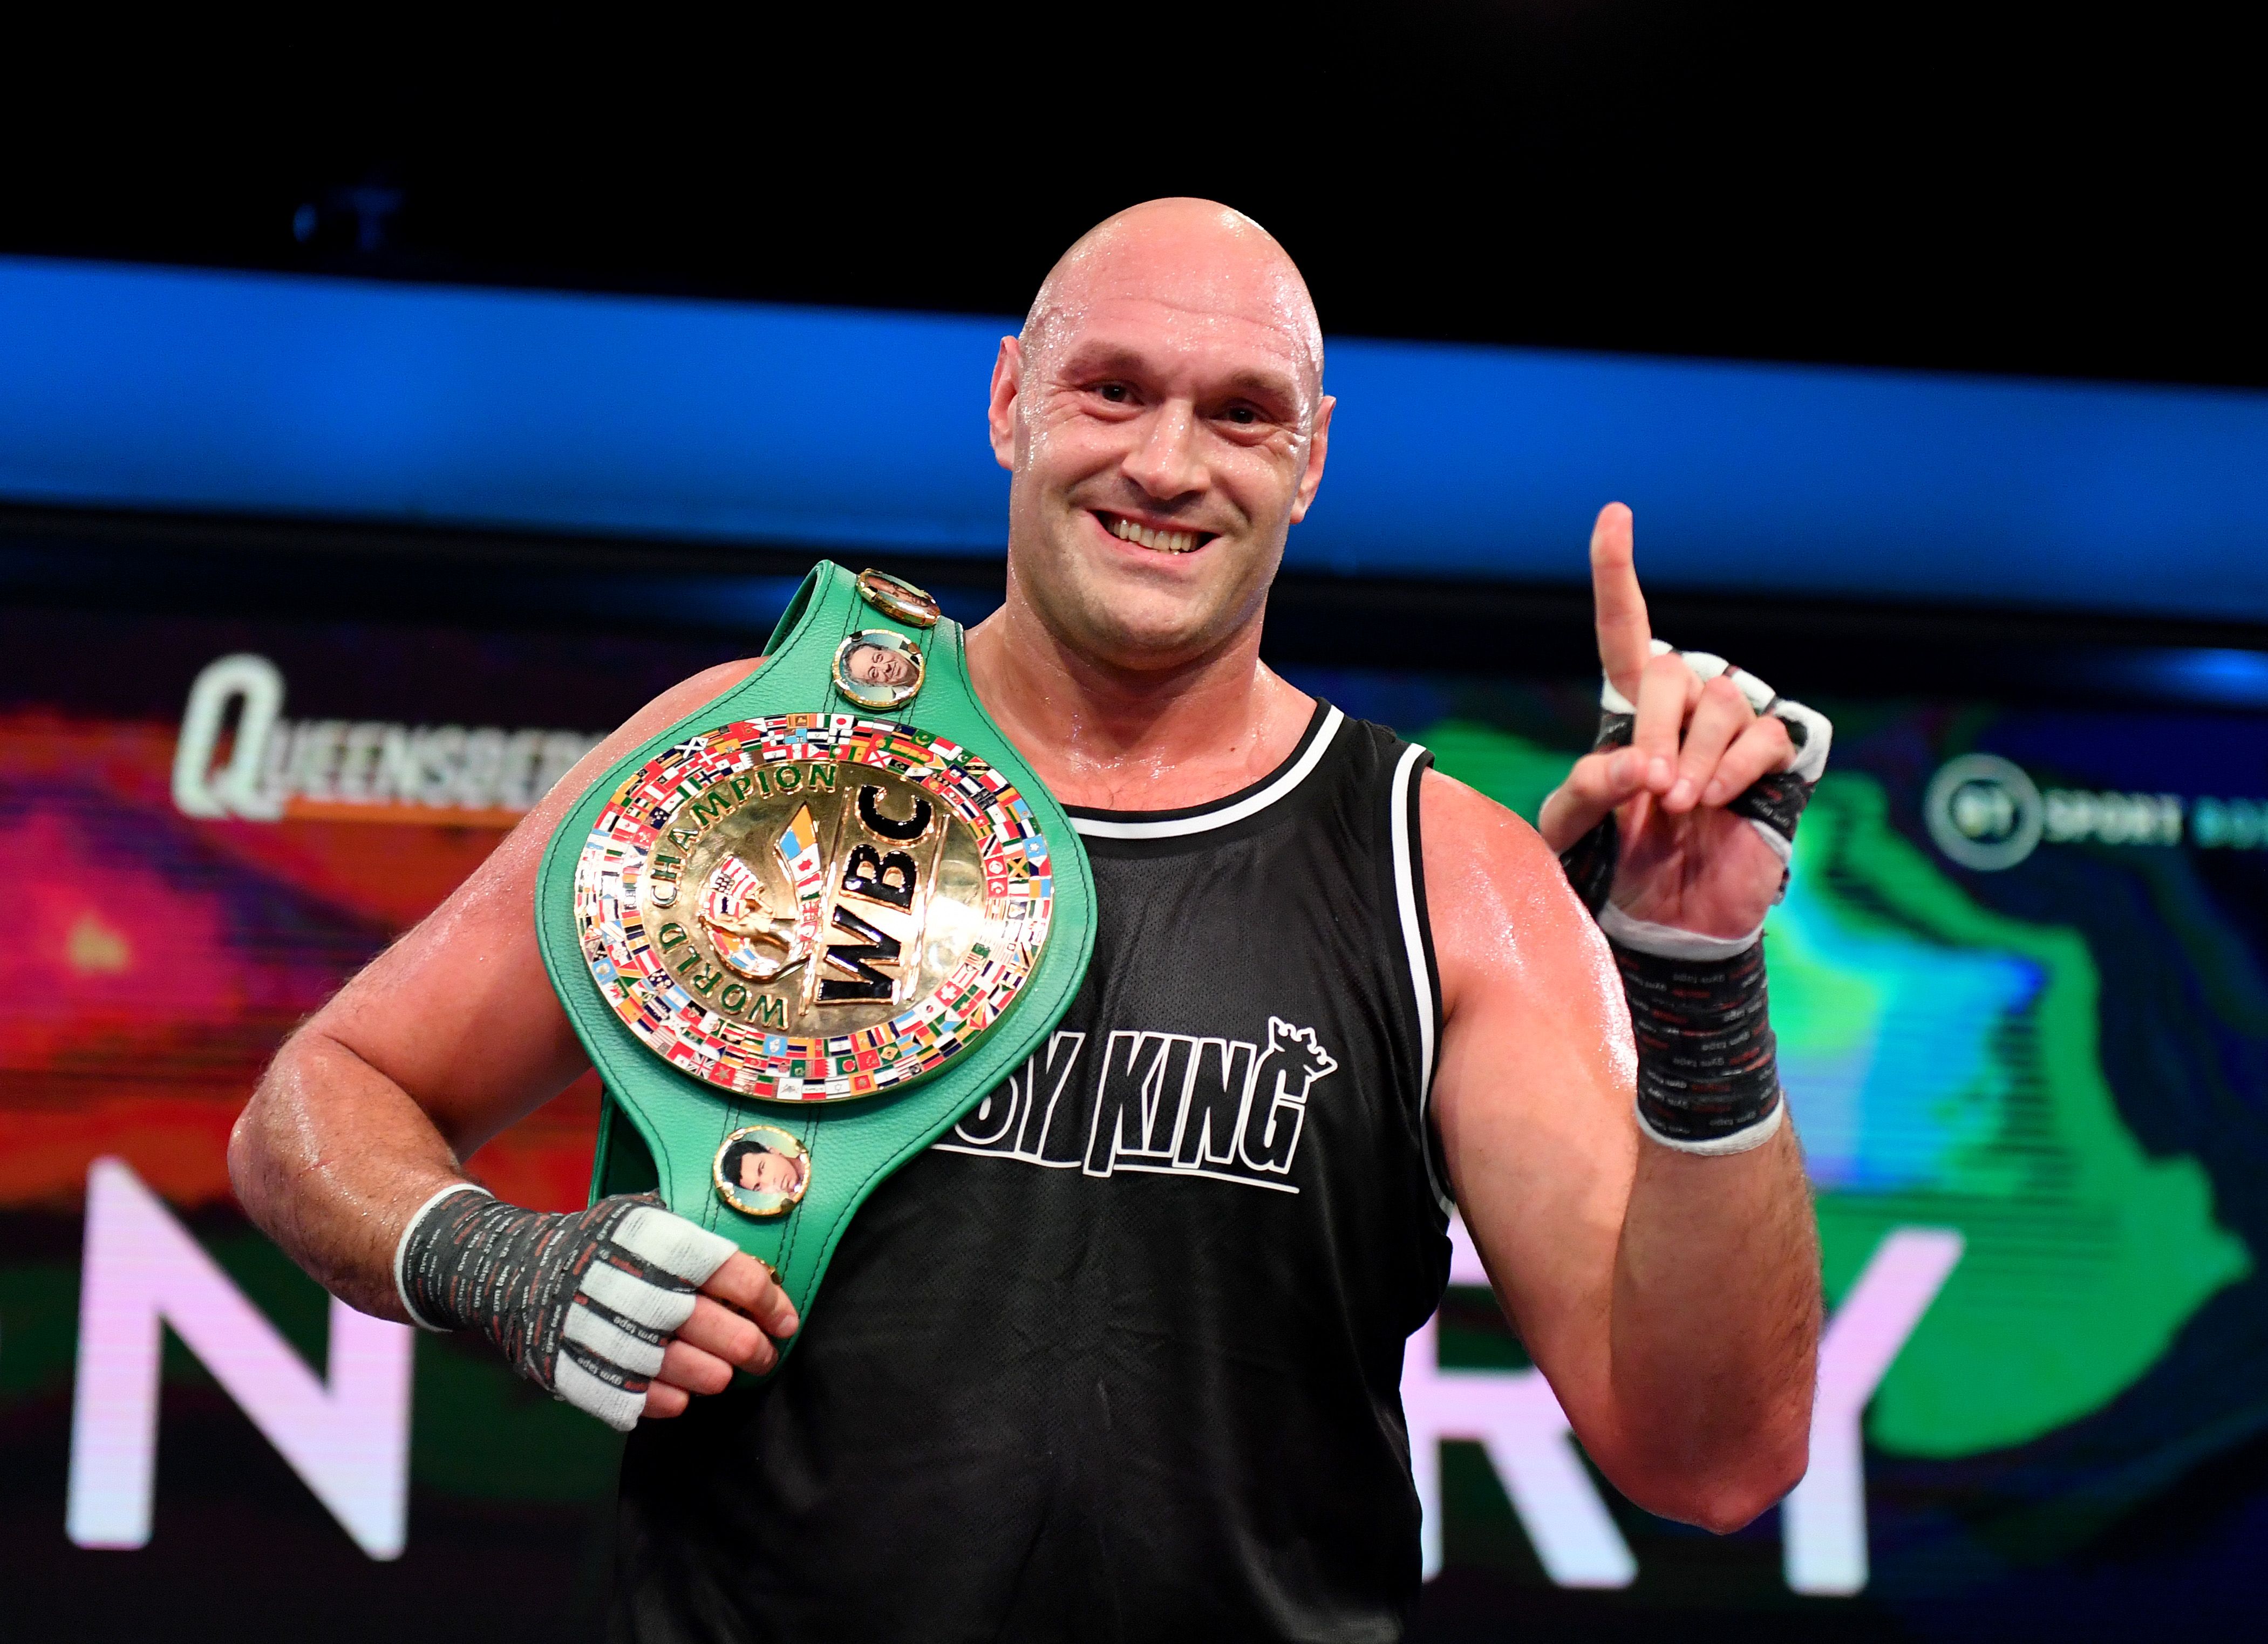 Tyson Fury says he won't fight Anthony Joshua or Oleksandr Usyk as he doesn't want to give them a payday